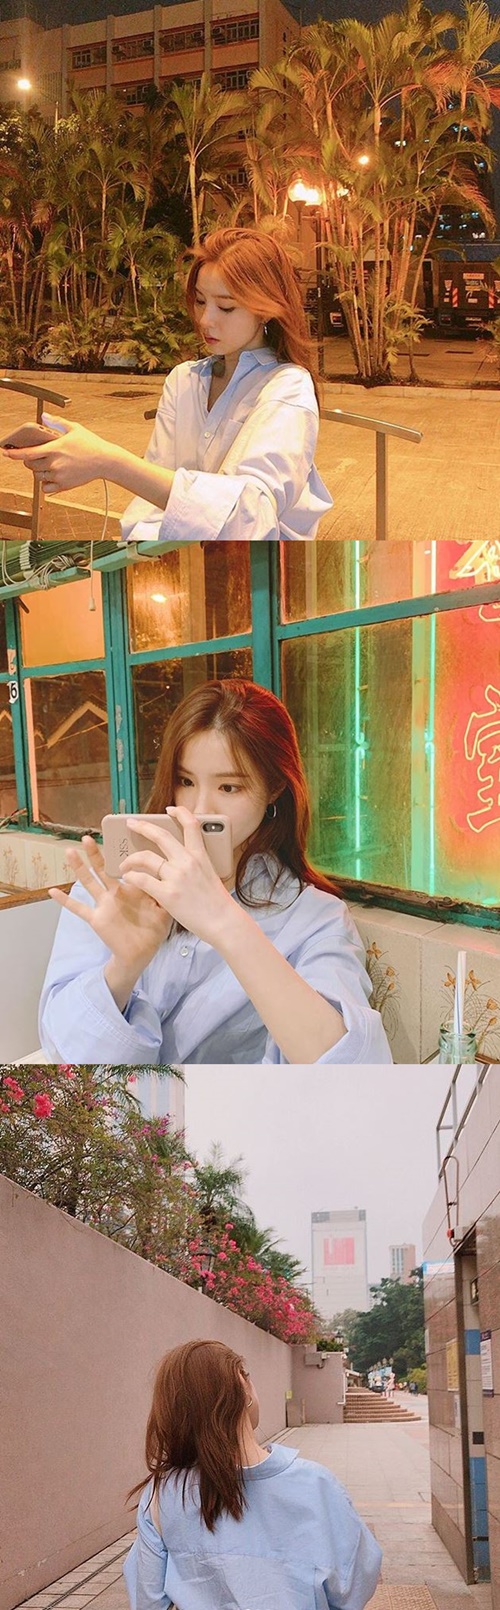 <p> Actress Shin Se-kyung, this pure attraction.</p><p>Shin Se-kyung is a 3 days of their Instagram “3. 31”the date with multiple photos published.</p><p>The revealed photo, Hong Kong night, or stand on something to focus on. Unaffected small metal look.</p><p>Another in the photo, Shin Se-kyung is a food store on the phone engrossed in. Pale makeup in the distinct visage admiration.</p><p>Meanwhile, Shin Se-kyung is the last month web reality shooting car Hong Kong into the United States.</p><p>He is coming 7 monthly broadcast expected MBC new tree mini-series ‘new pipe to command’.</p>